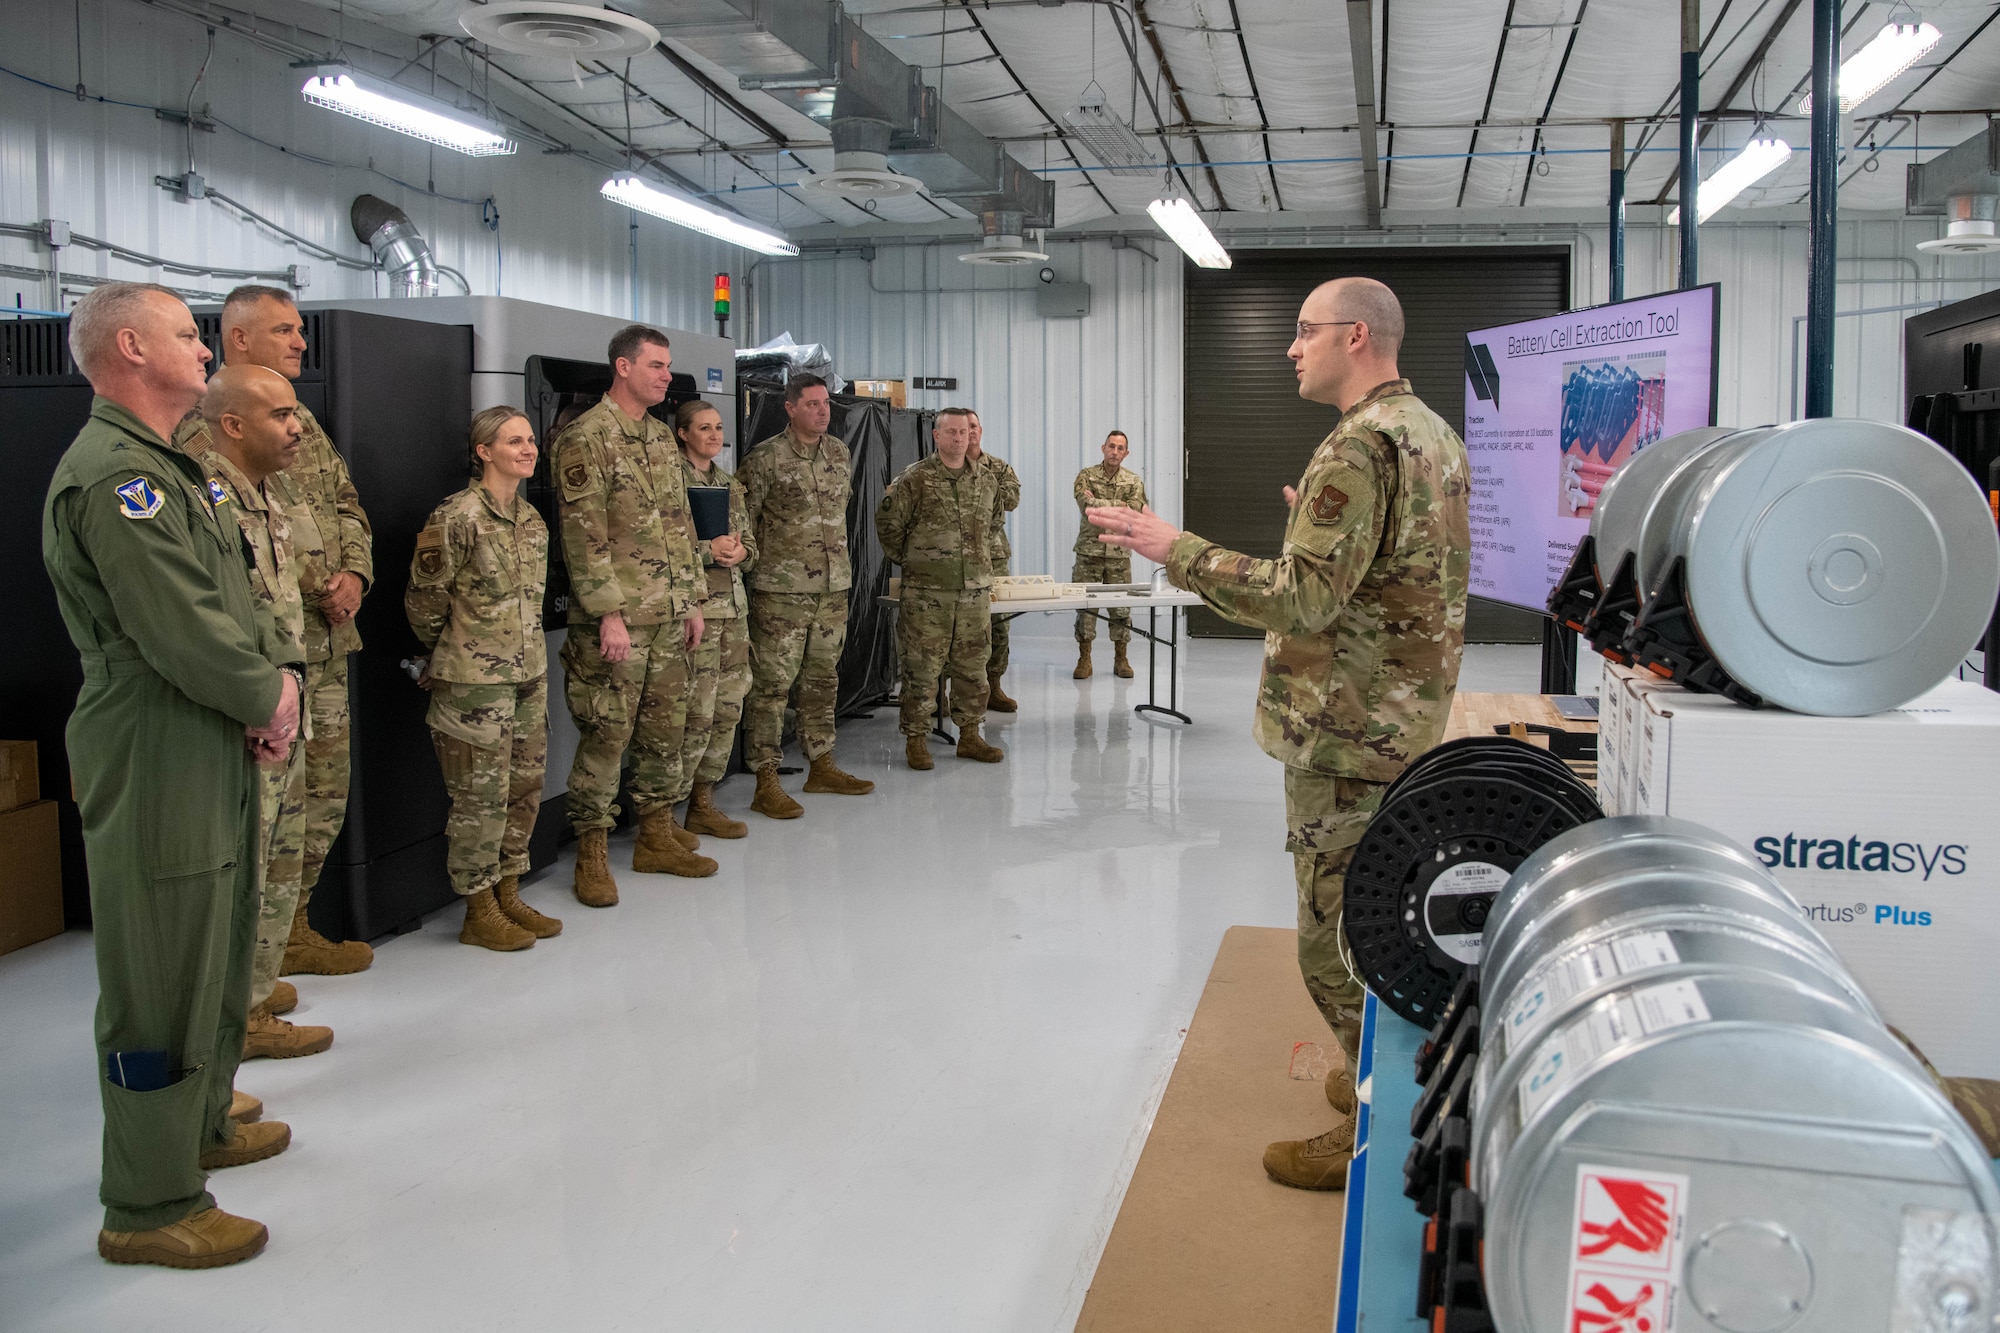 Surrounded by equipment, an Airman briefs leadership on technology.